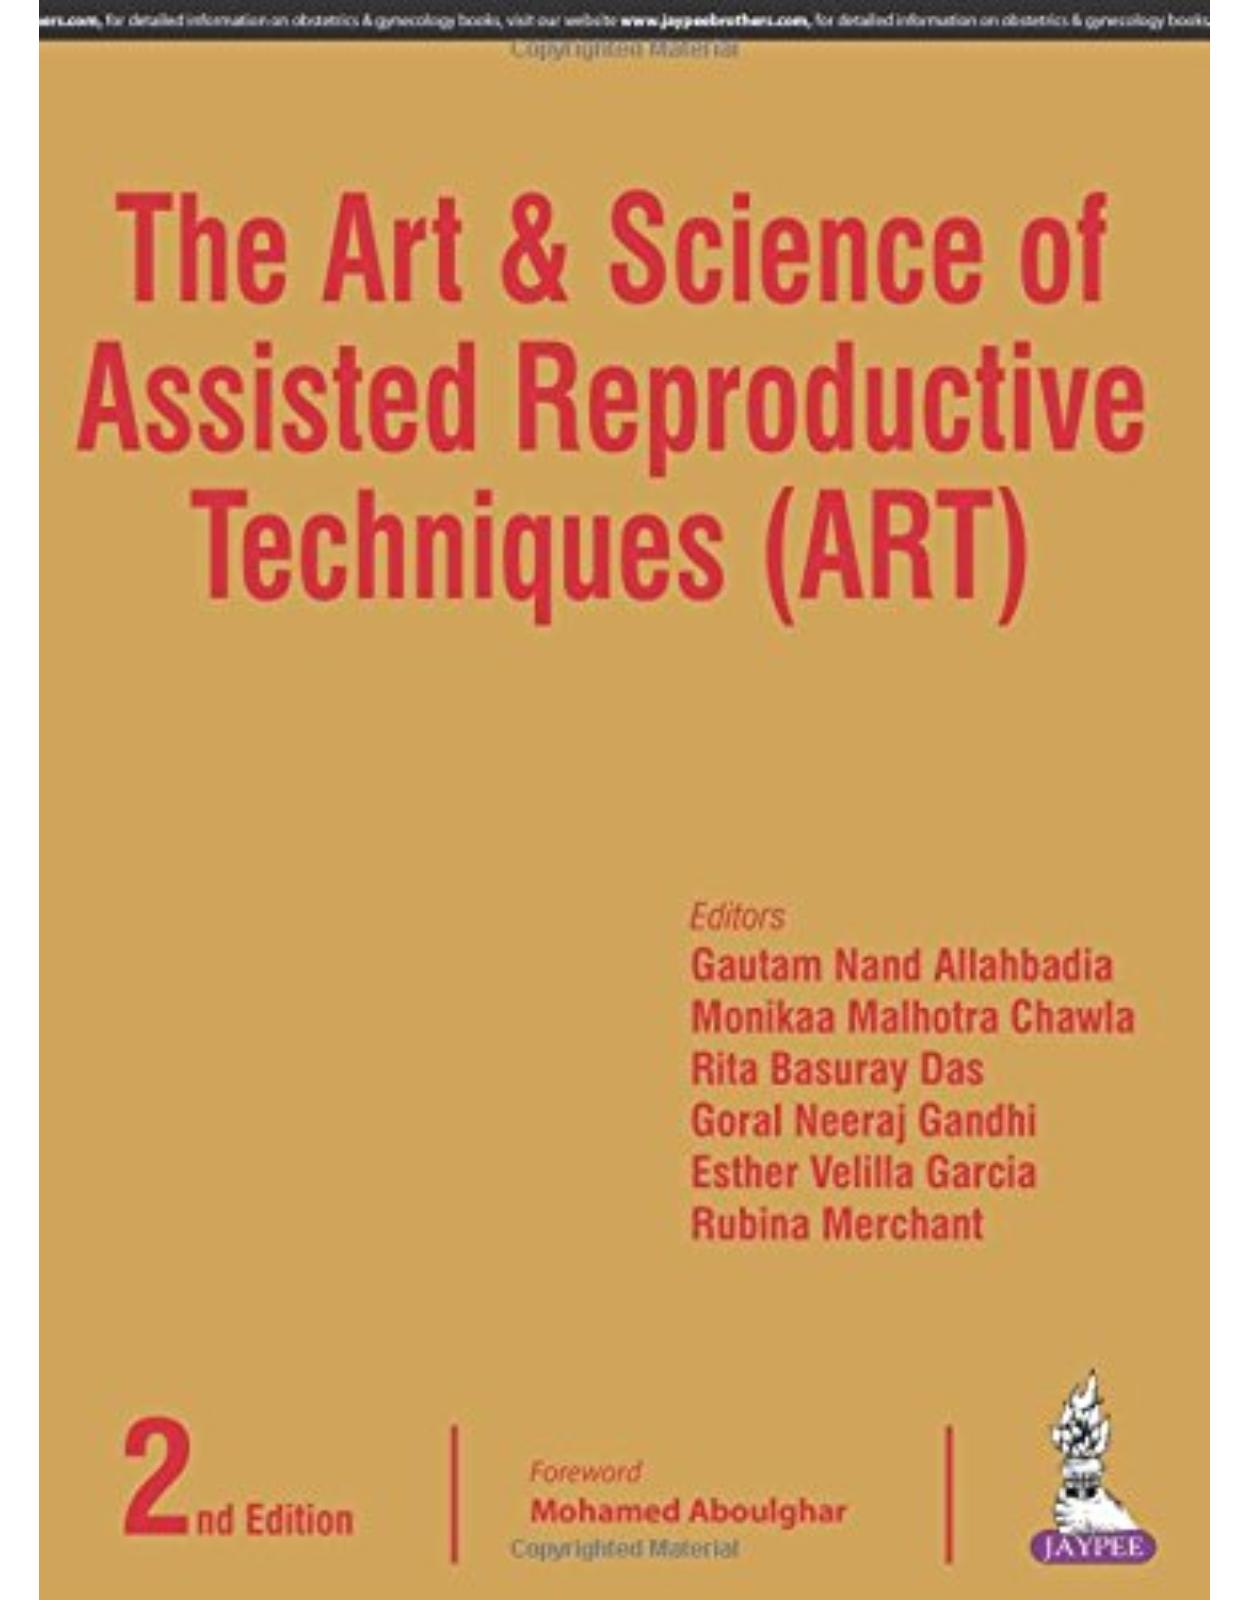 The Art & Science of Assisted Reproductive Techniques (ART)